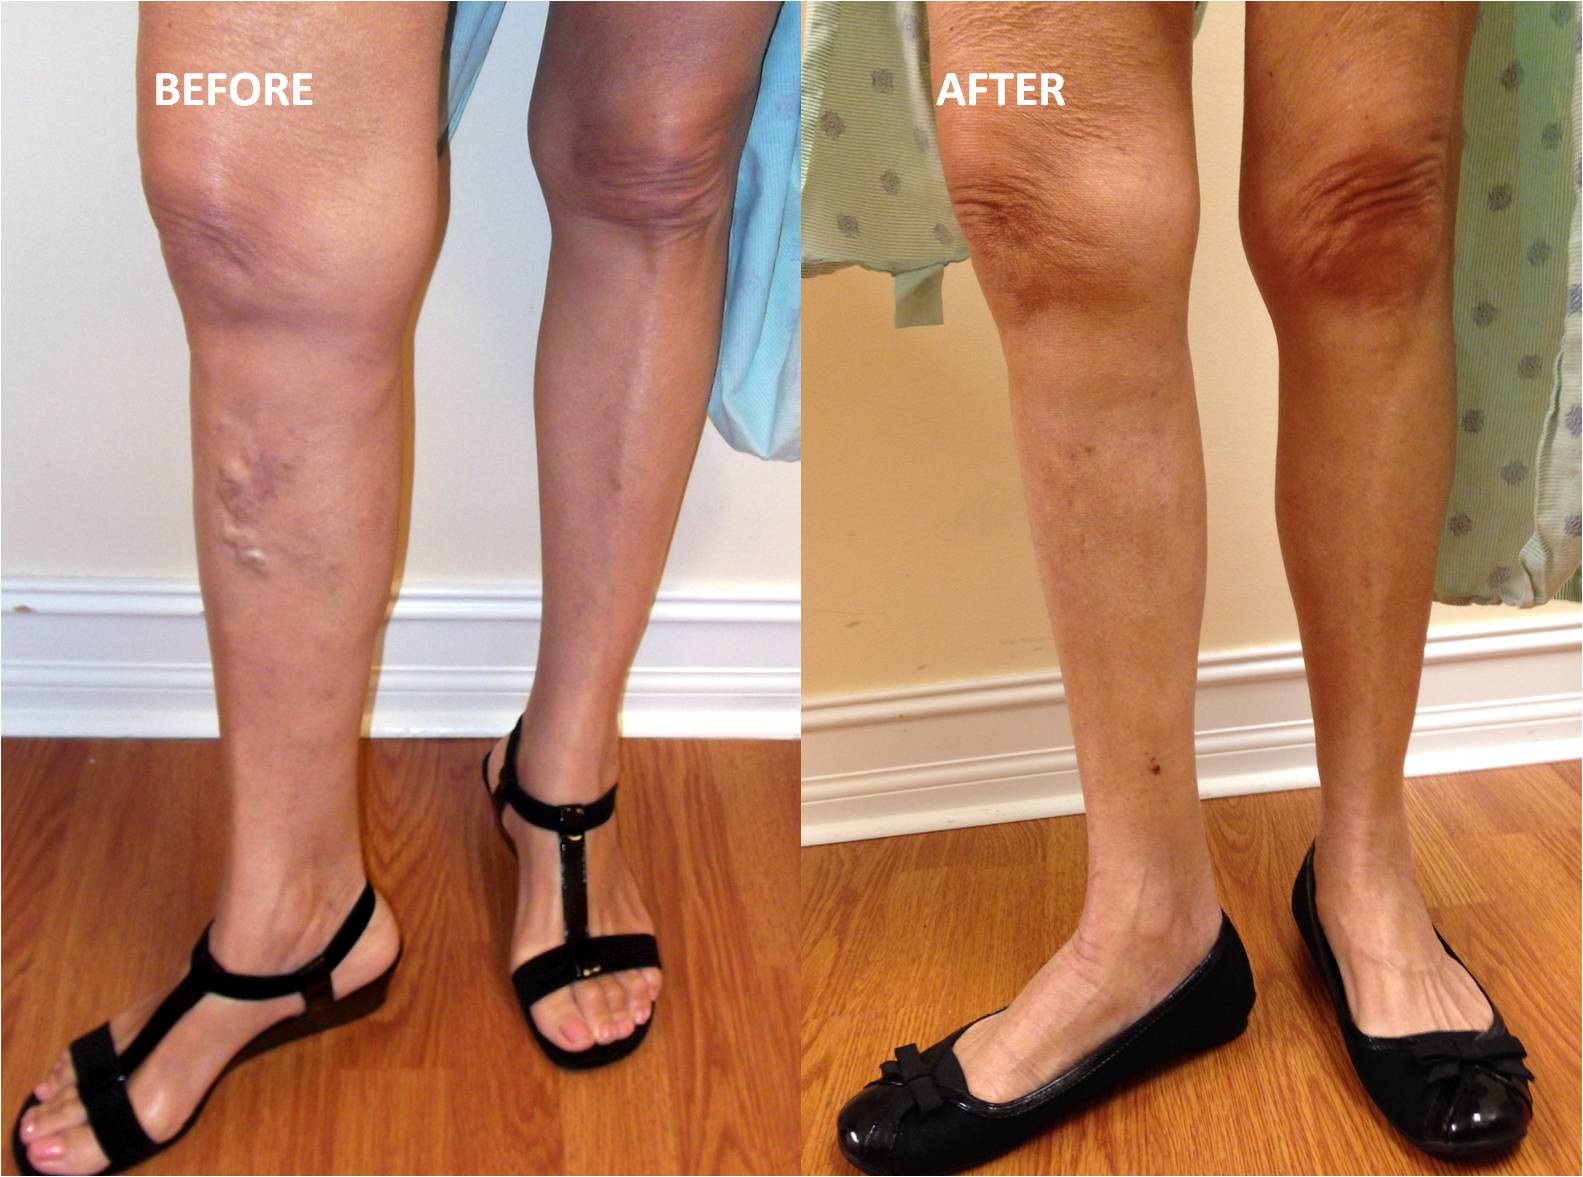 Different Non-Surgical Medications And Cost OF varicose vein